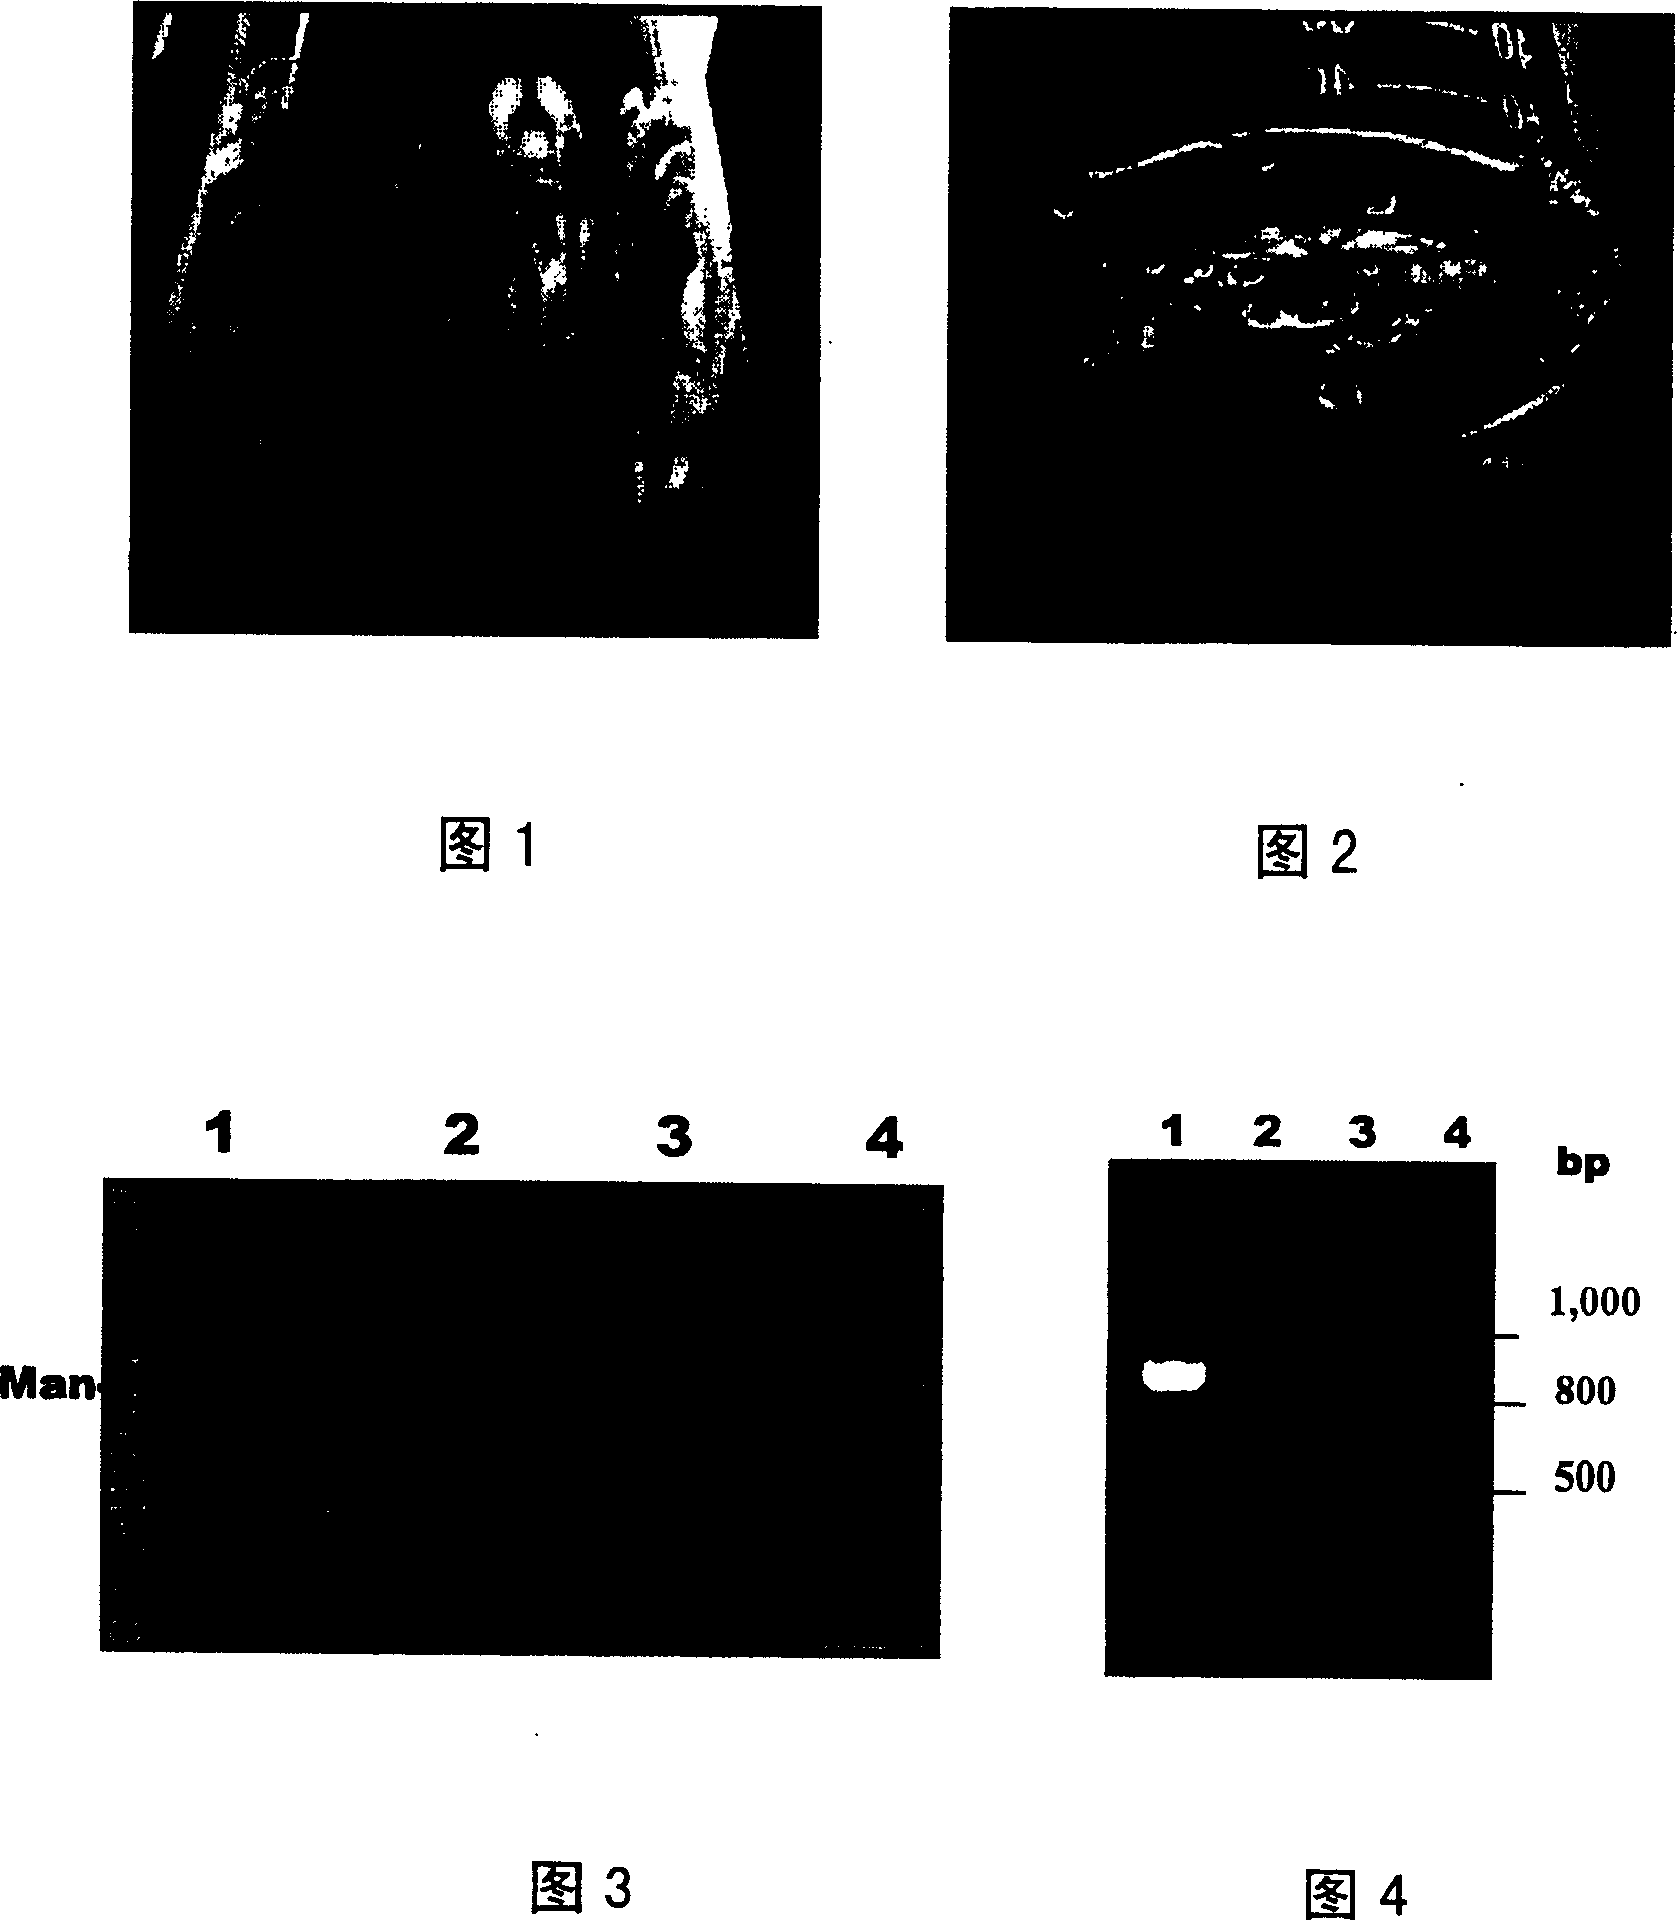 Method for culturing and producing cffeetive ingredients in polyose of saussurca hairy roots of saussurea medusa maxim